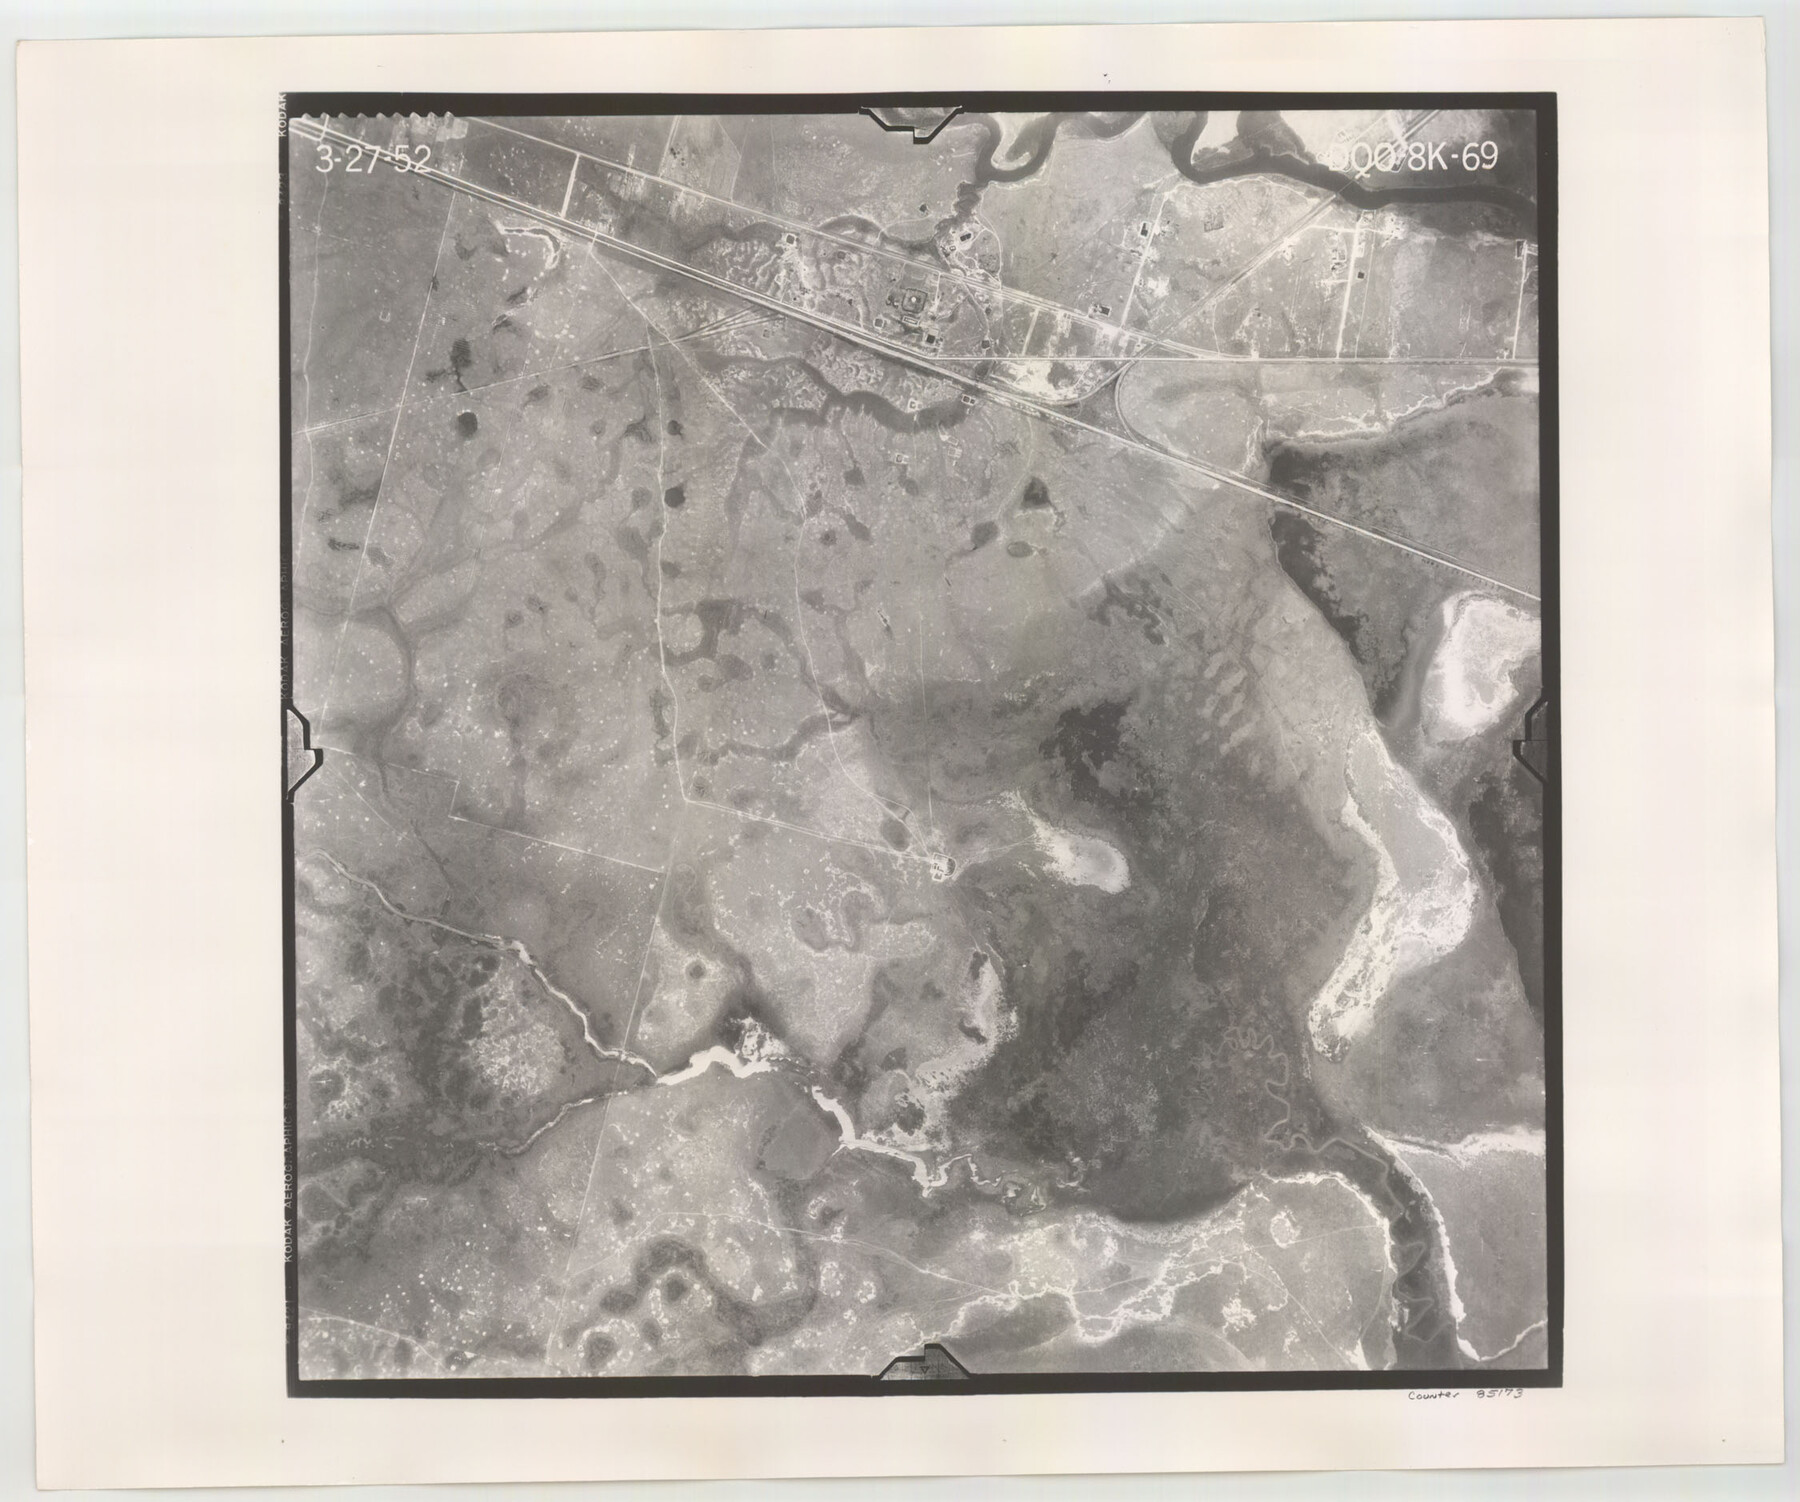 85173, Flight Mission No. DQO-8K, Frame 69, Galveston County, General Map Collection